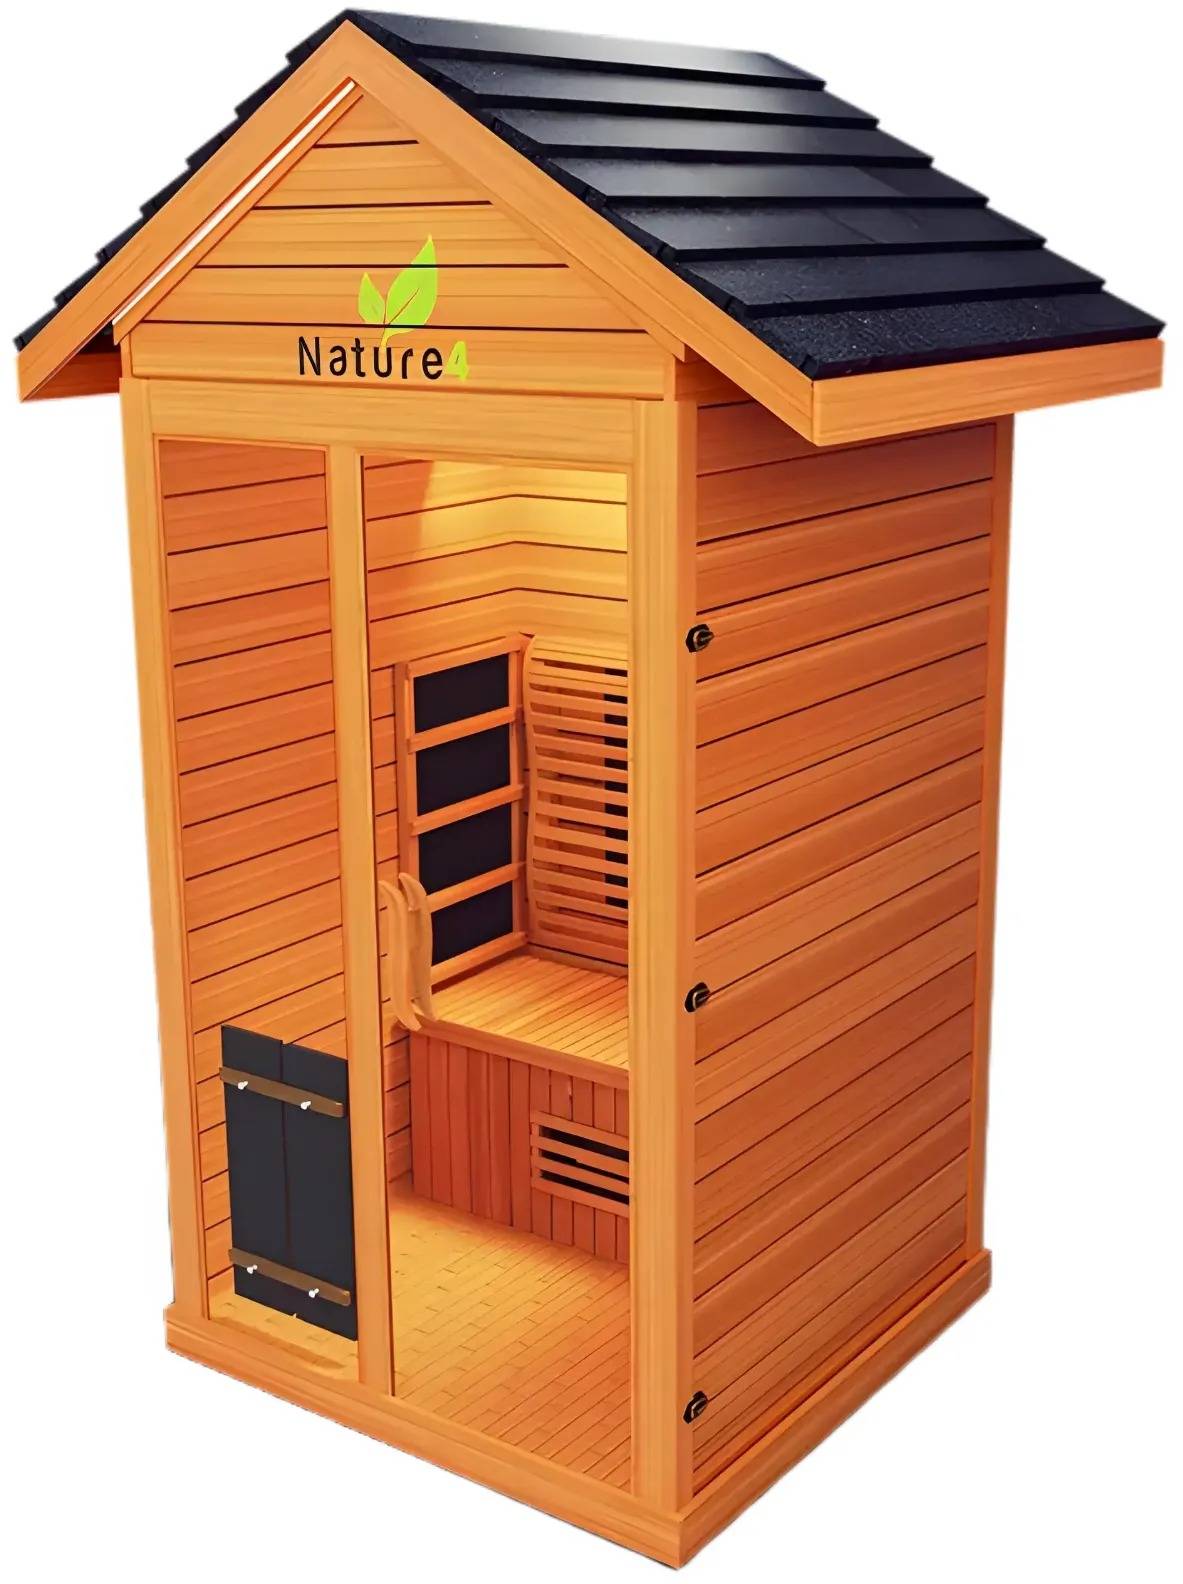 ZiahCare's Medical Saunas 1-2 Person Outdoor Full Spectrum Infrared Sauna Nature 4 Mockup Image 5